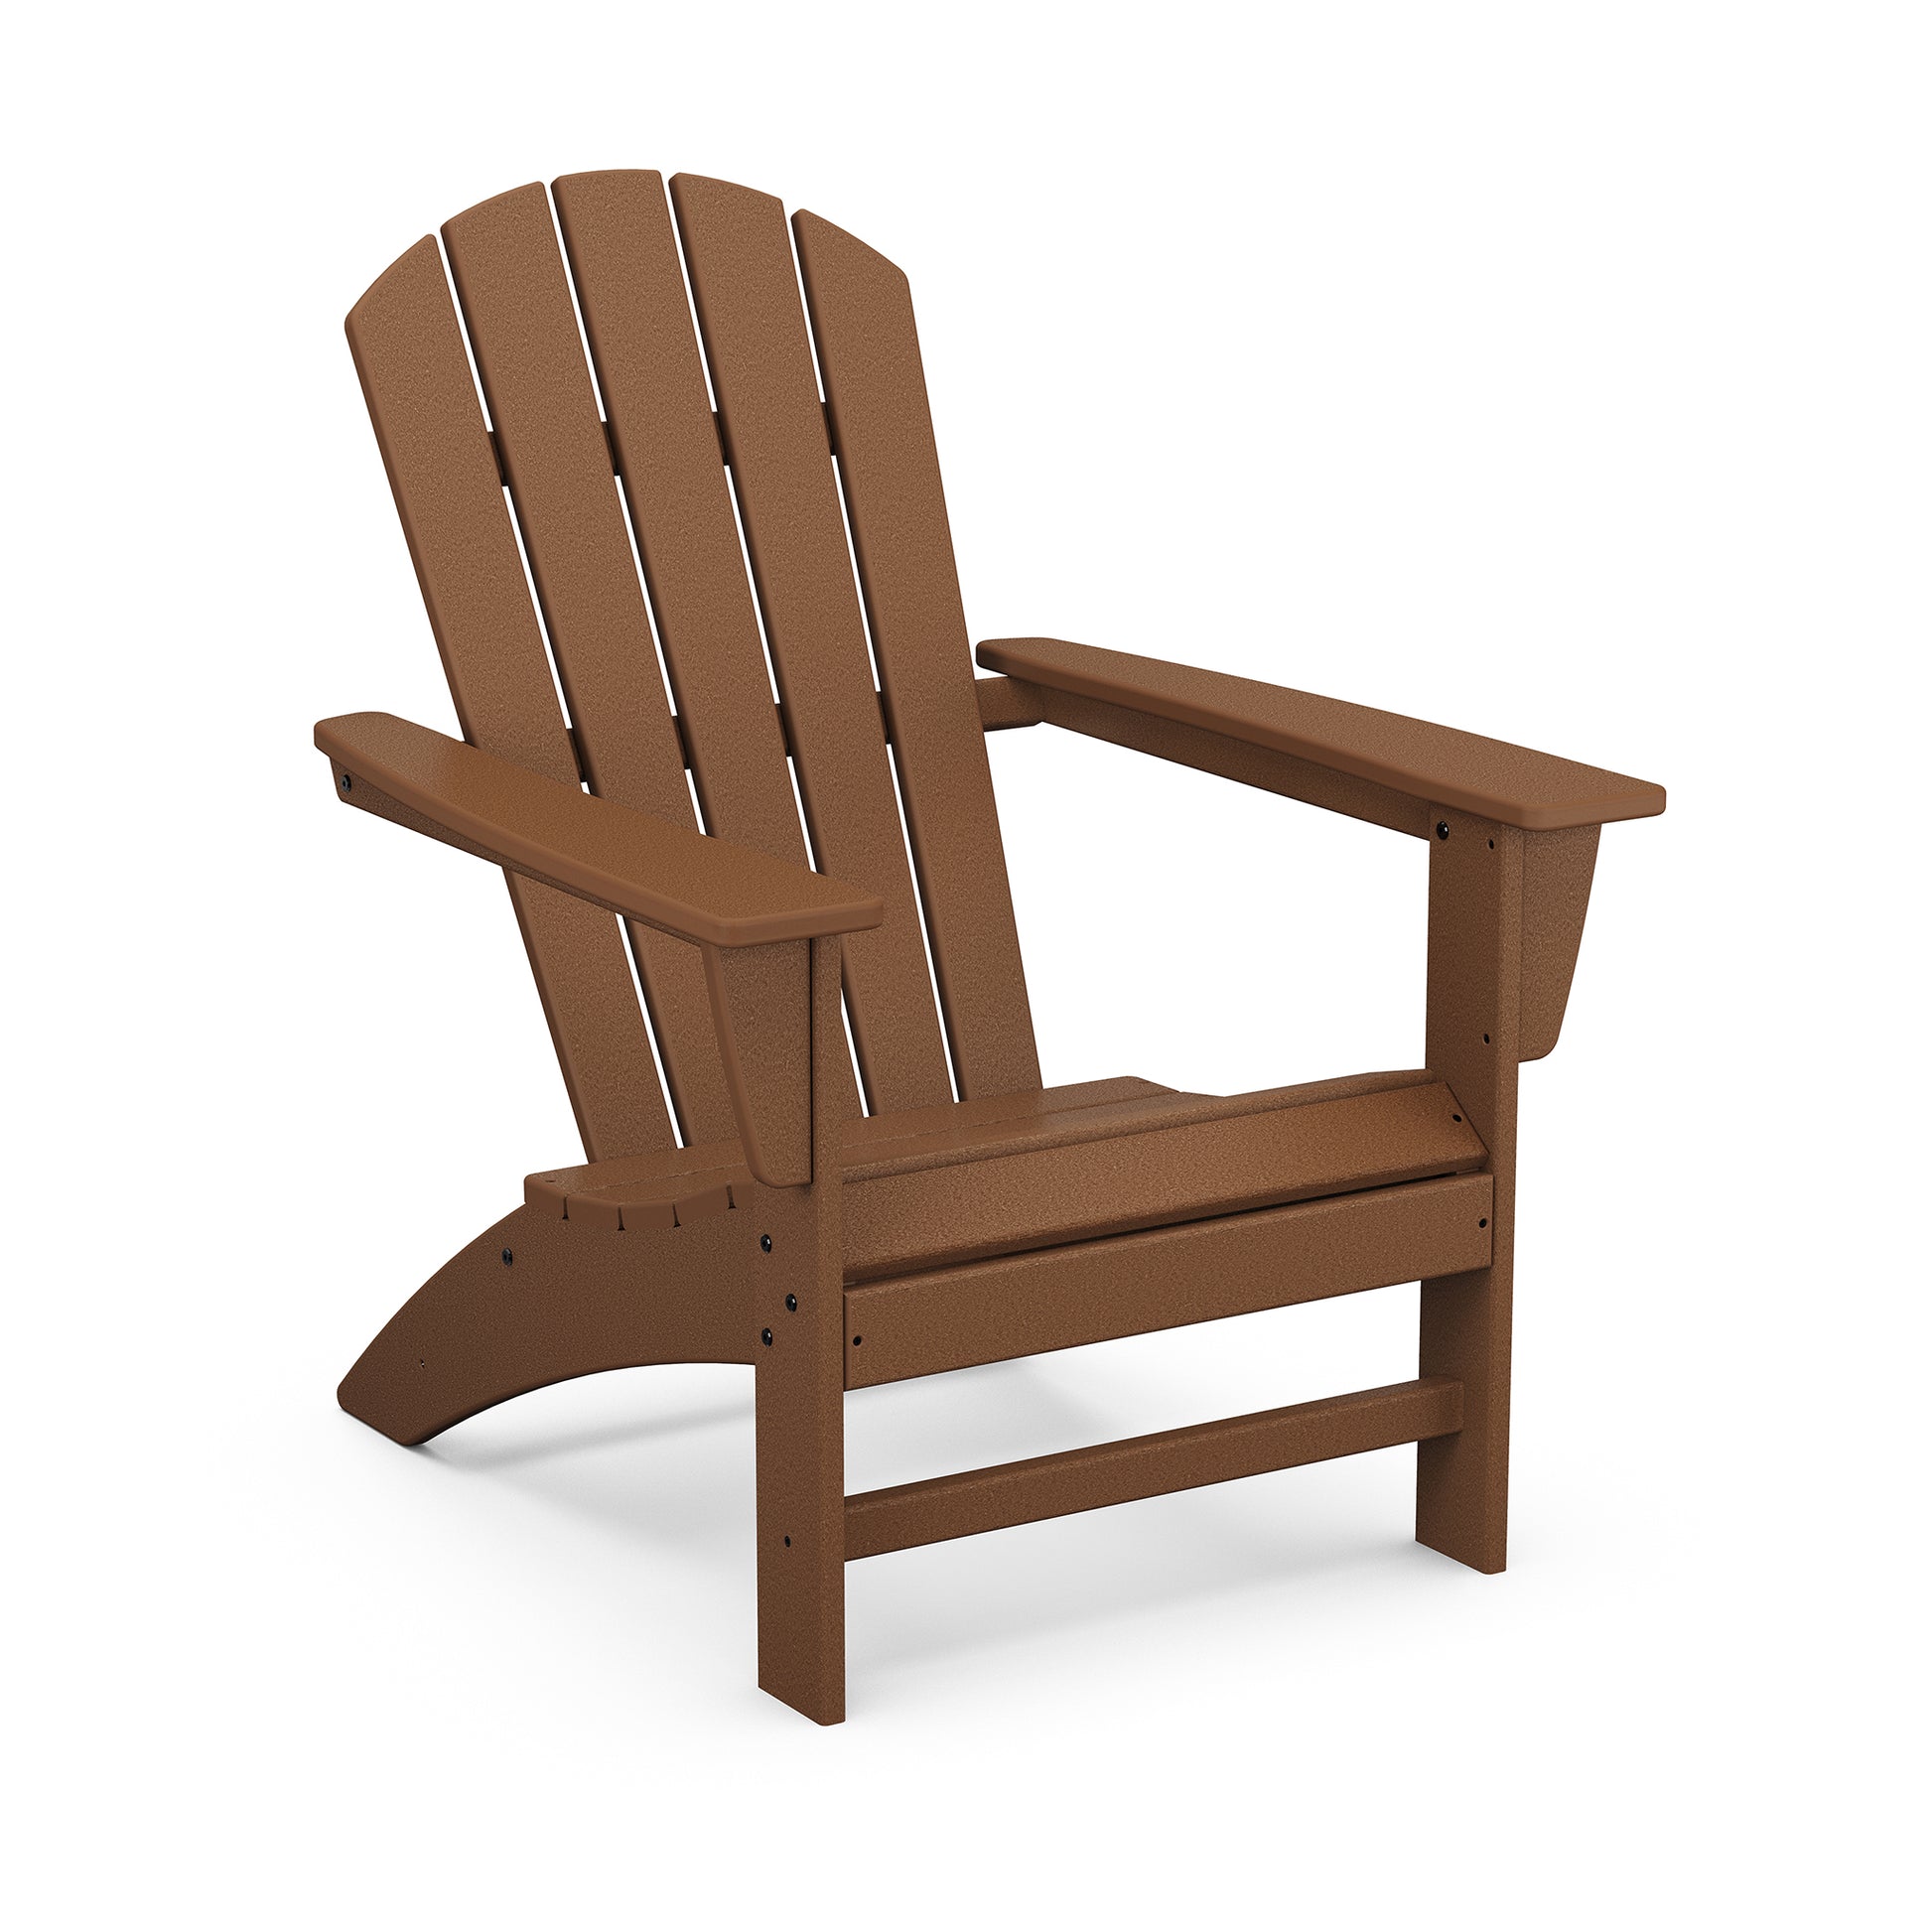 A brown eco-friendly POLYWOOD Nautical Adirondack chair made of plastic, shown in a three-quarter view angle, isolated on a white background.